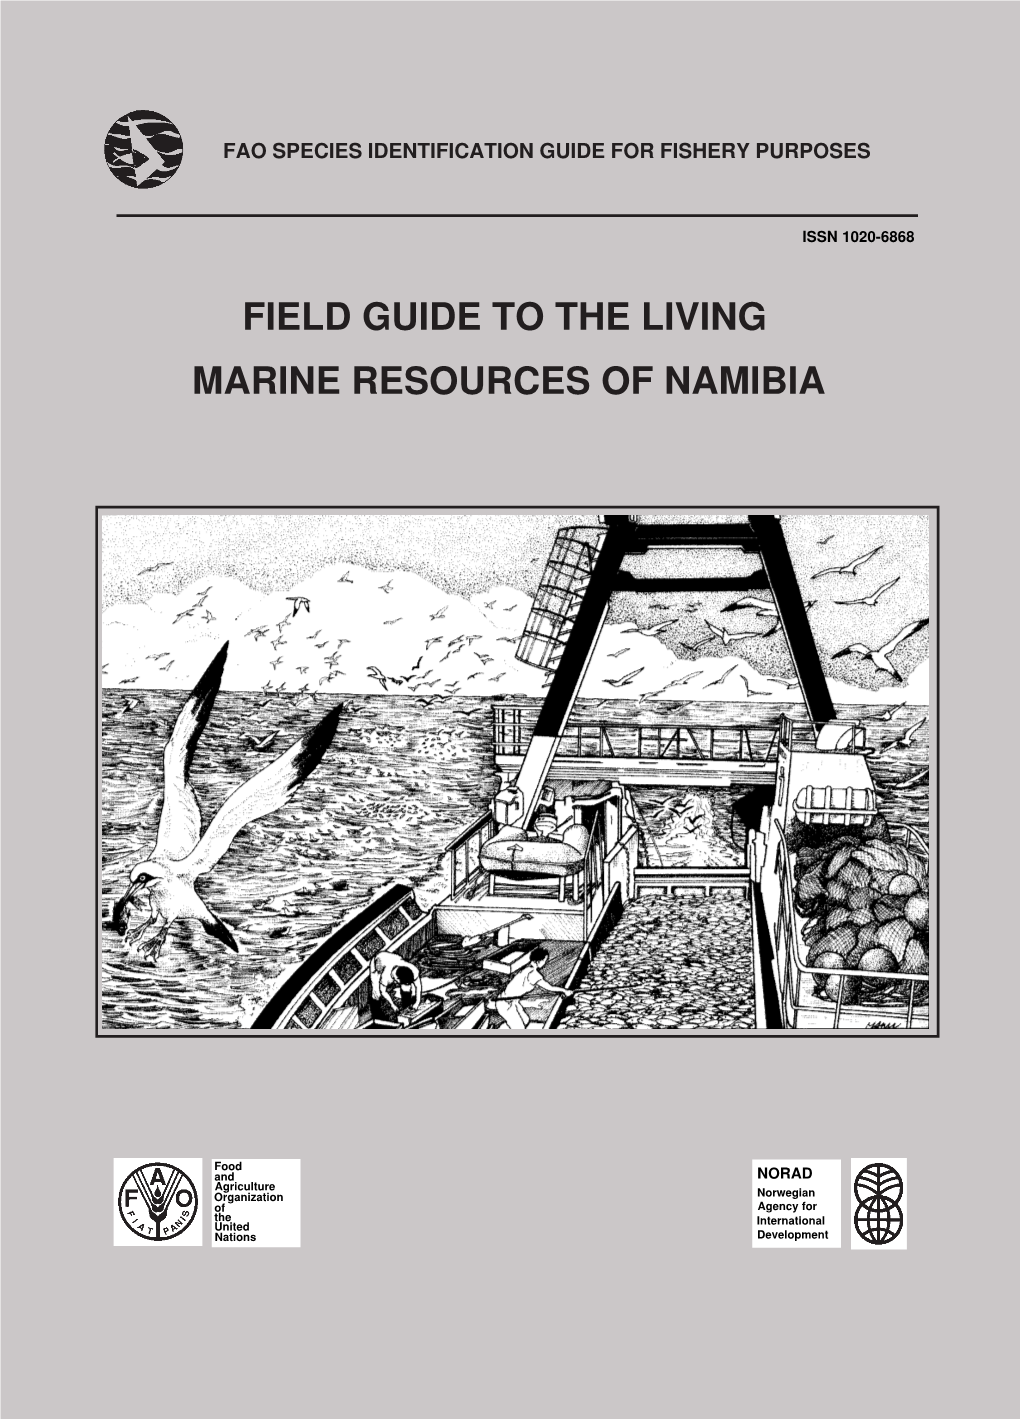 Field Guide to the Living Marine Resources of Namibia.Pdf